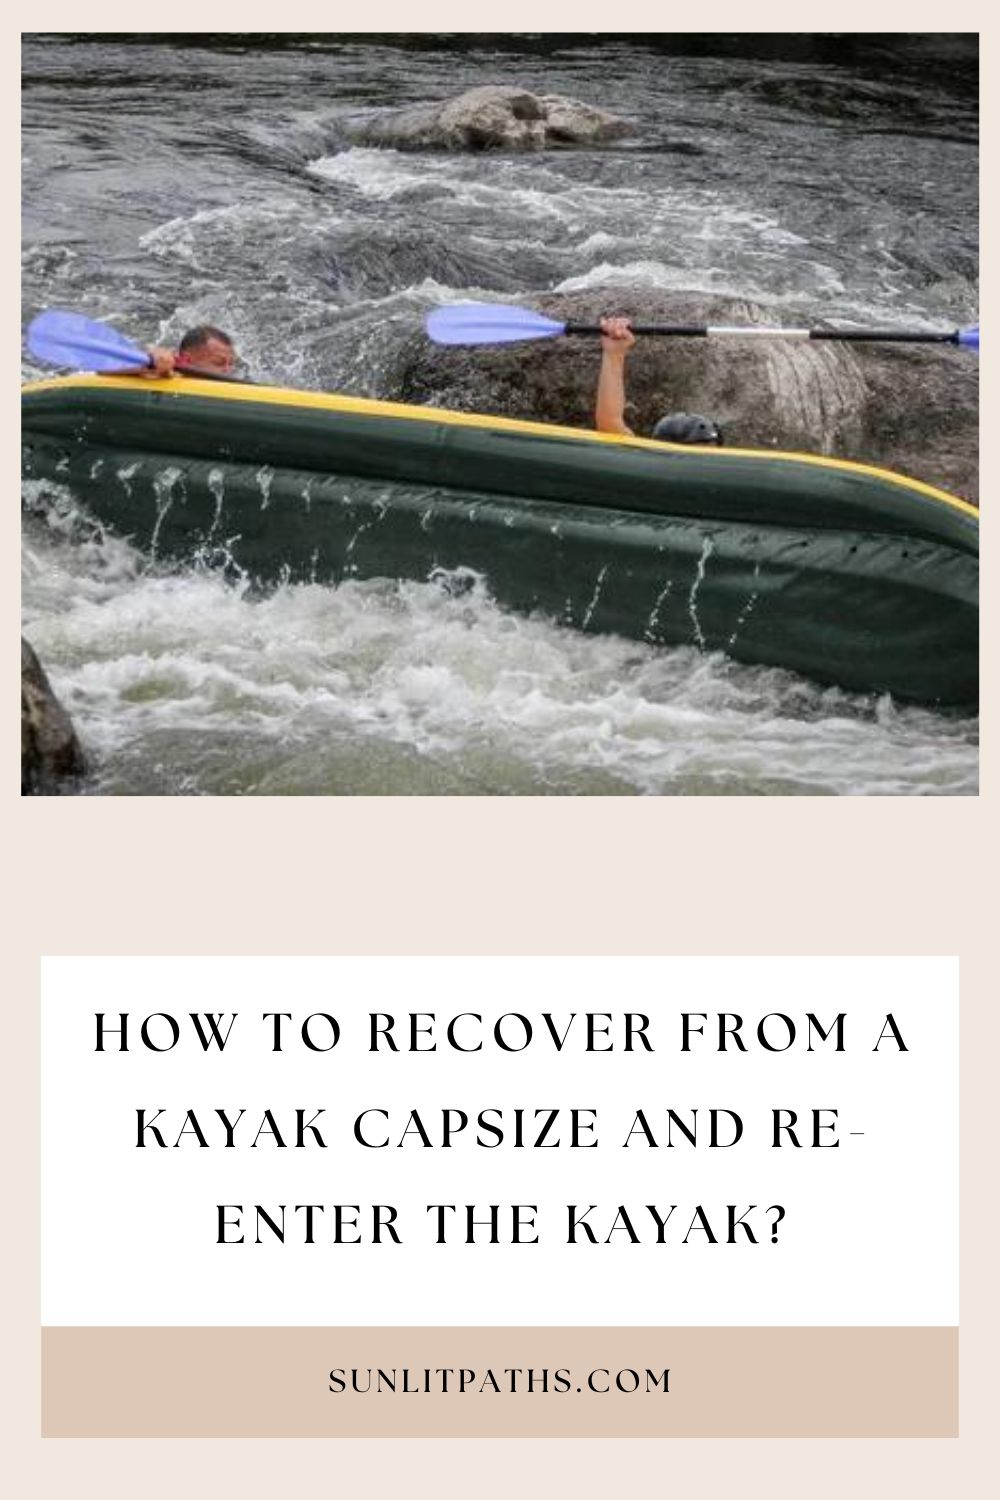 How to Recover from a Kayak Capsize and Re-enter the Kayak